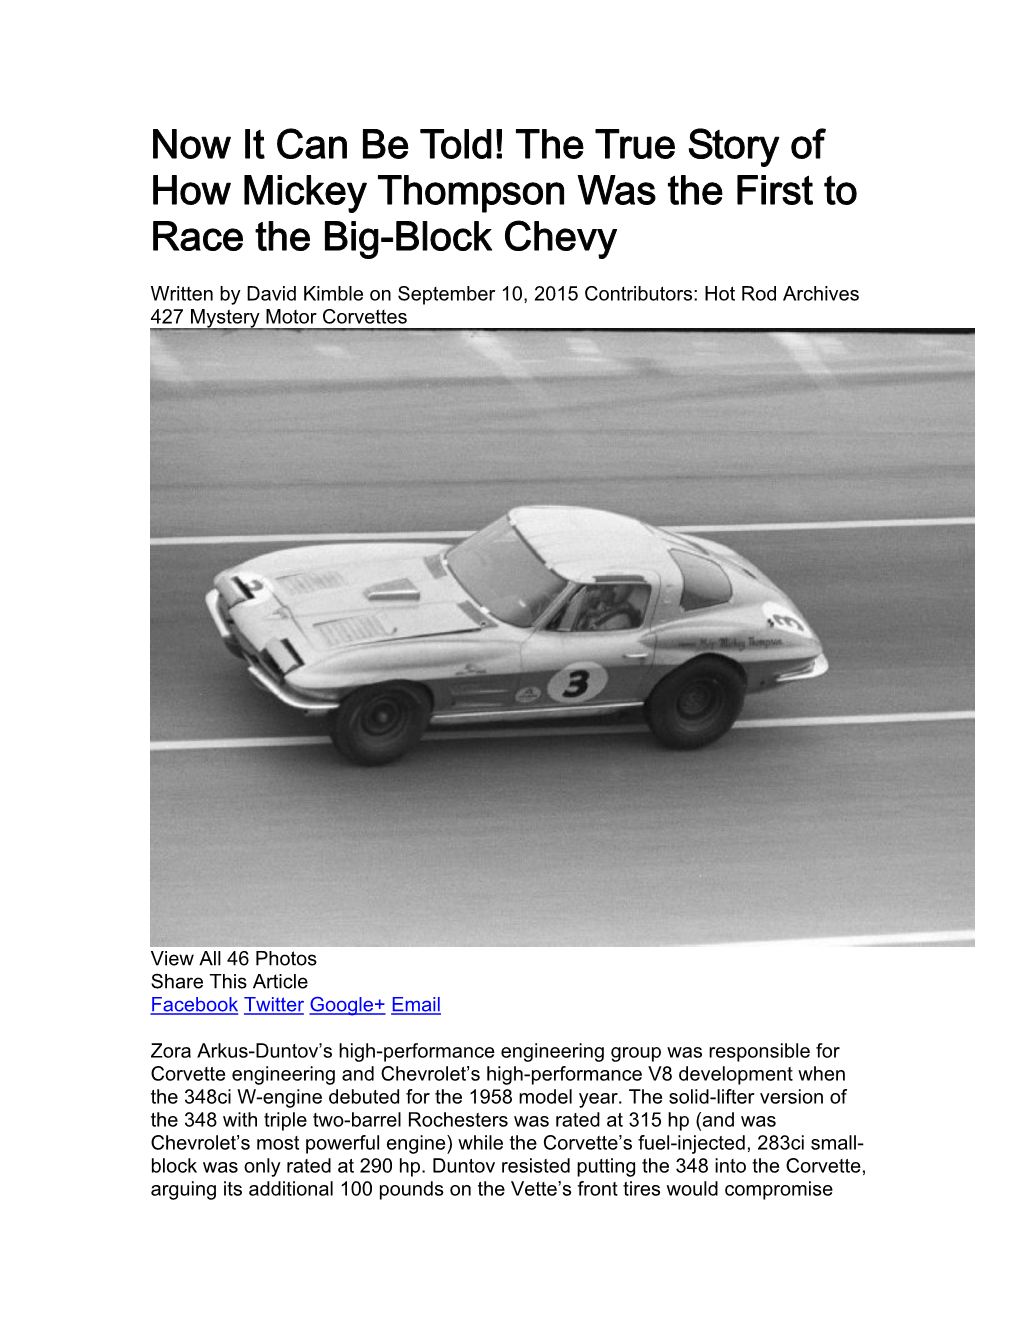 Now It Can Be Told! the True Story of How Mickey Thompson Was the First to Race the Big-Block Chevy